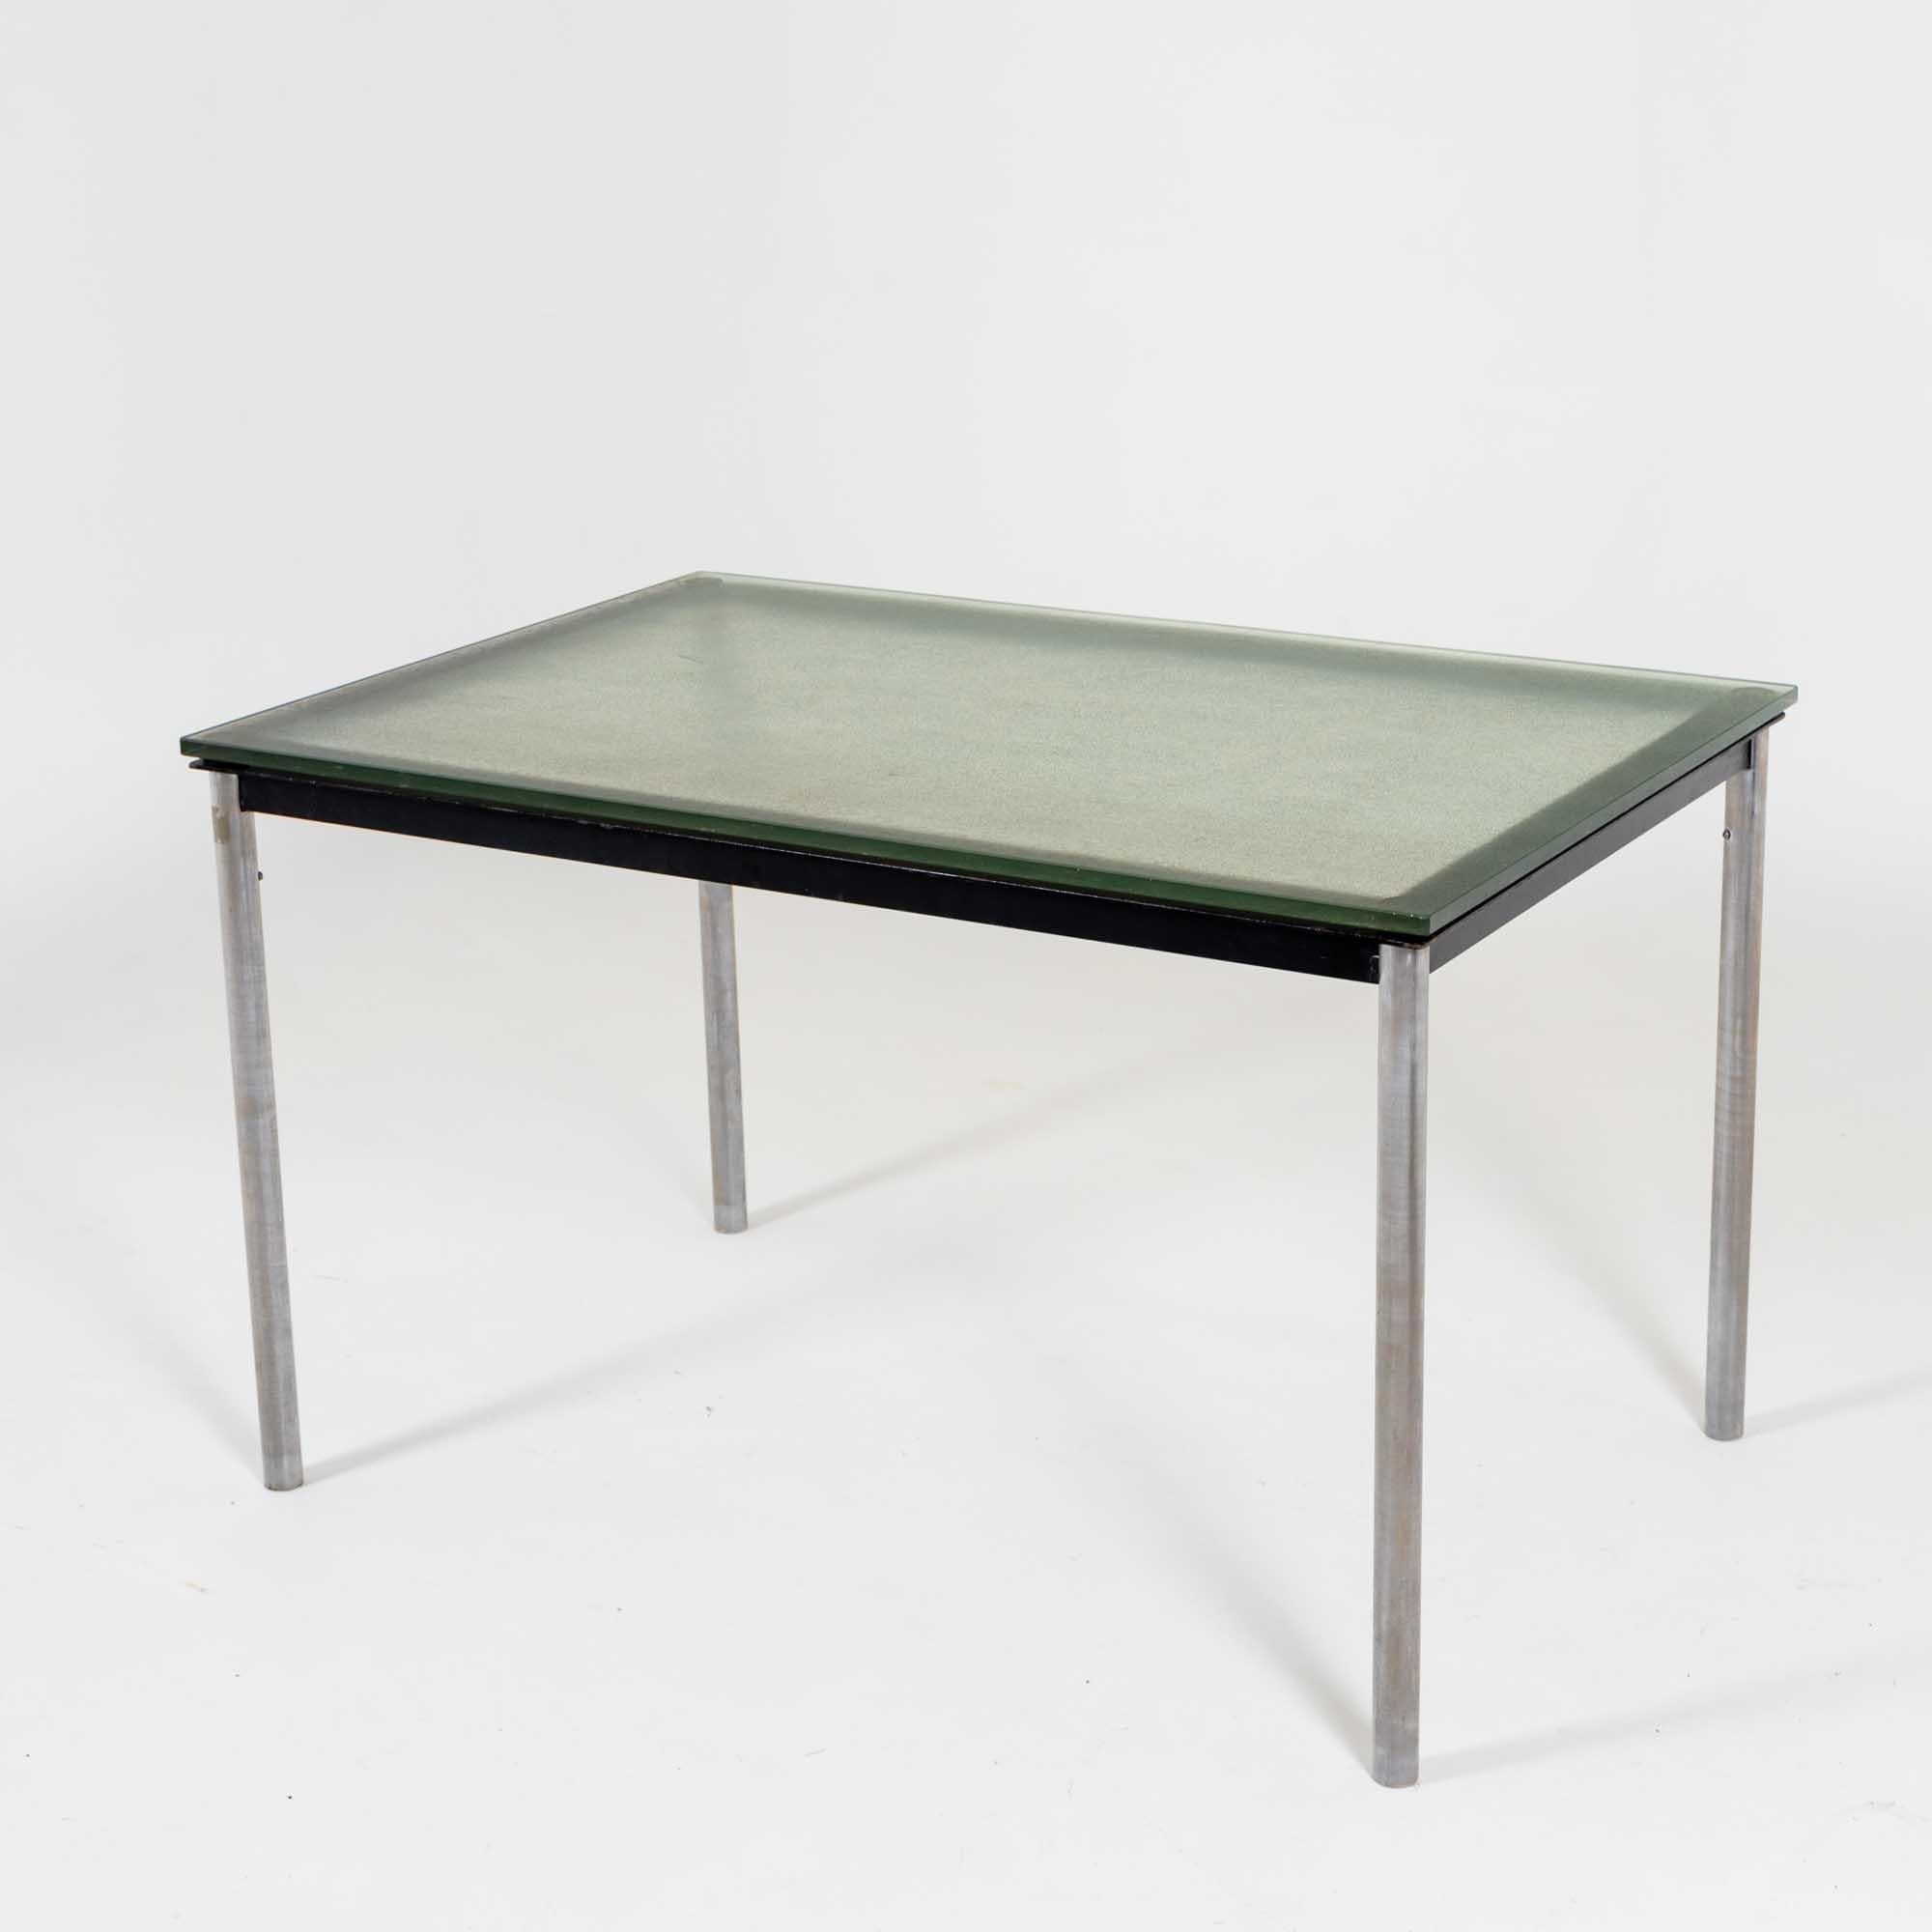 Rectangular table or desk designed by Le Corbusier in 1928. This is a later edition by the company Cassina. The table stands on chromed legs and the strong green-tinted glass top with a slightly structured surface rests on a black lacquered smooth